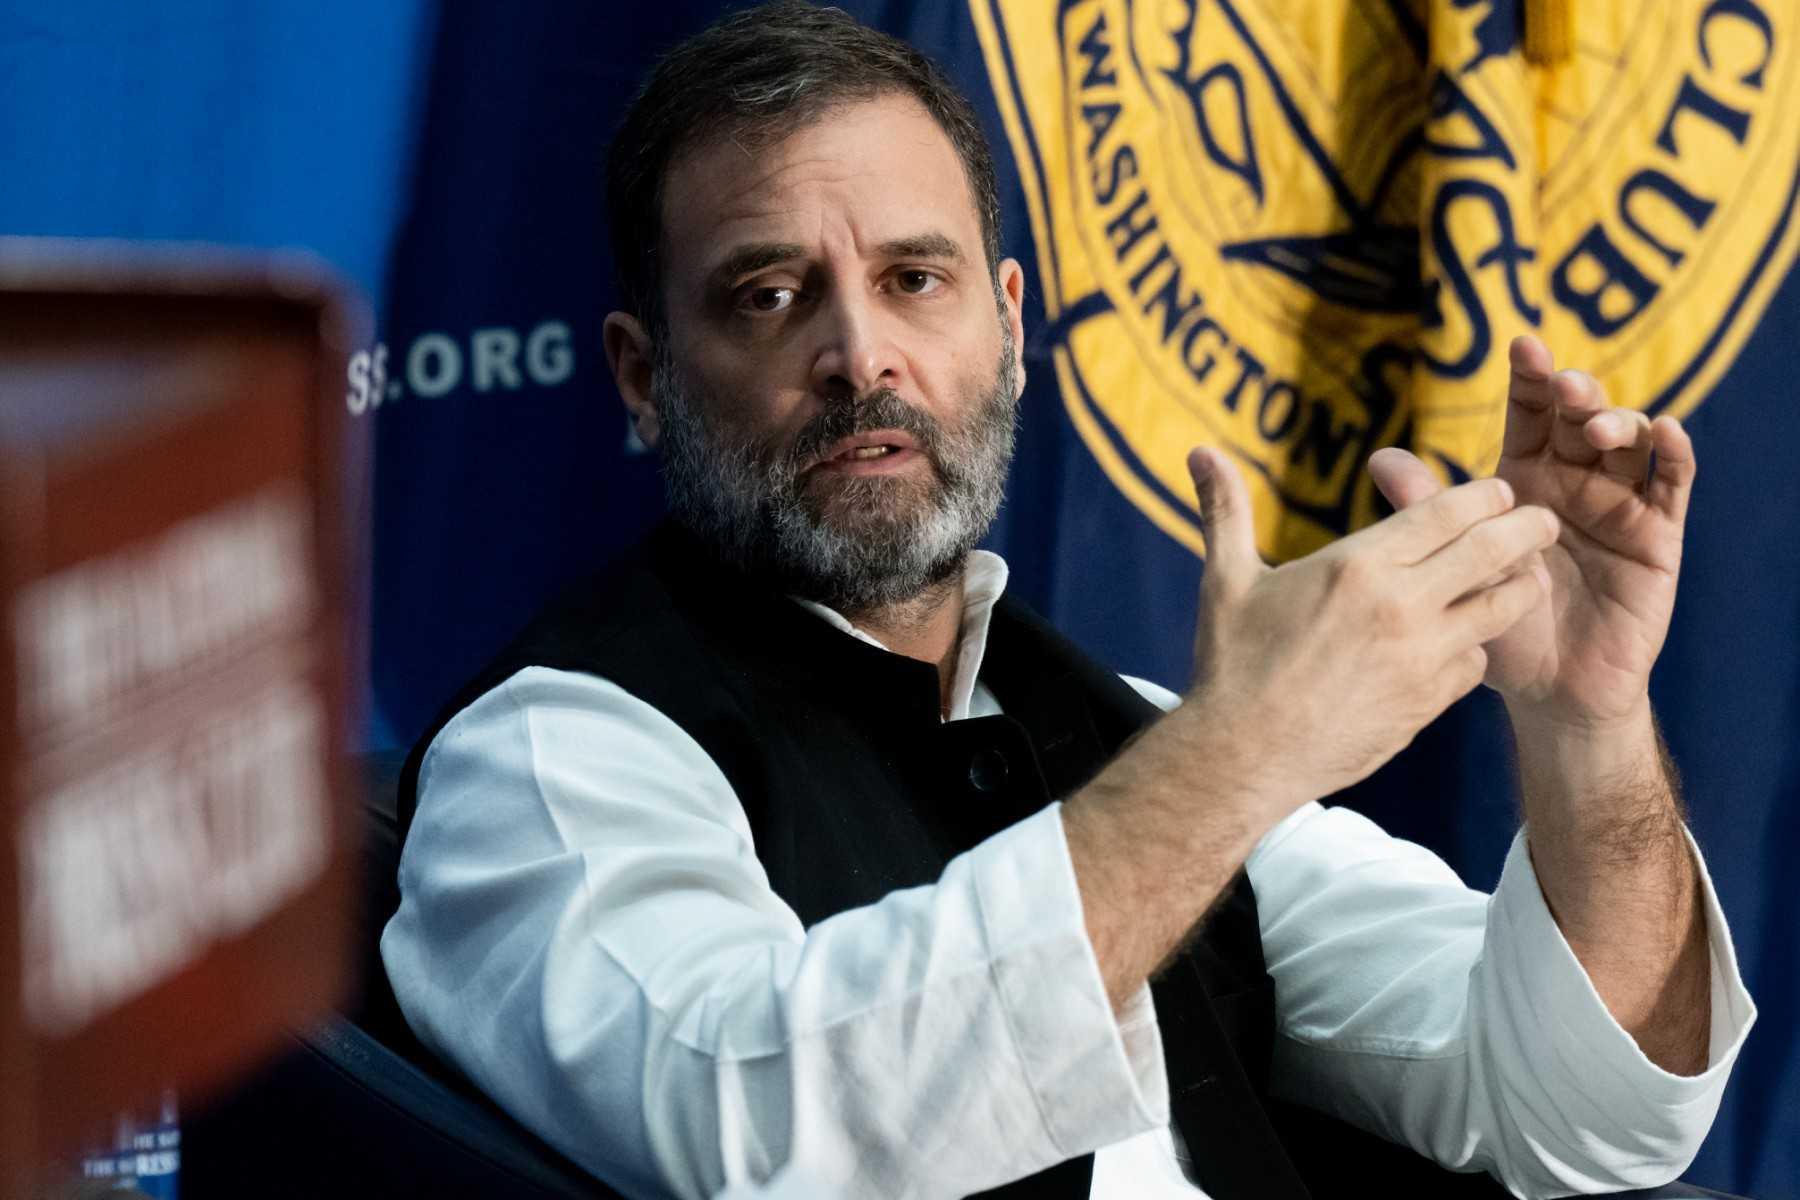 Rahul Gandhi, India's most prominent opposition leader, speaks during a Headliners Newsmaker event at the National Press Club in Washington, DC, on June 1. Photo: AFP 